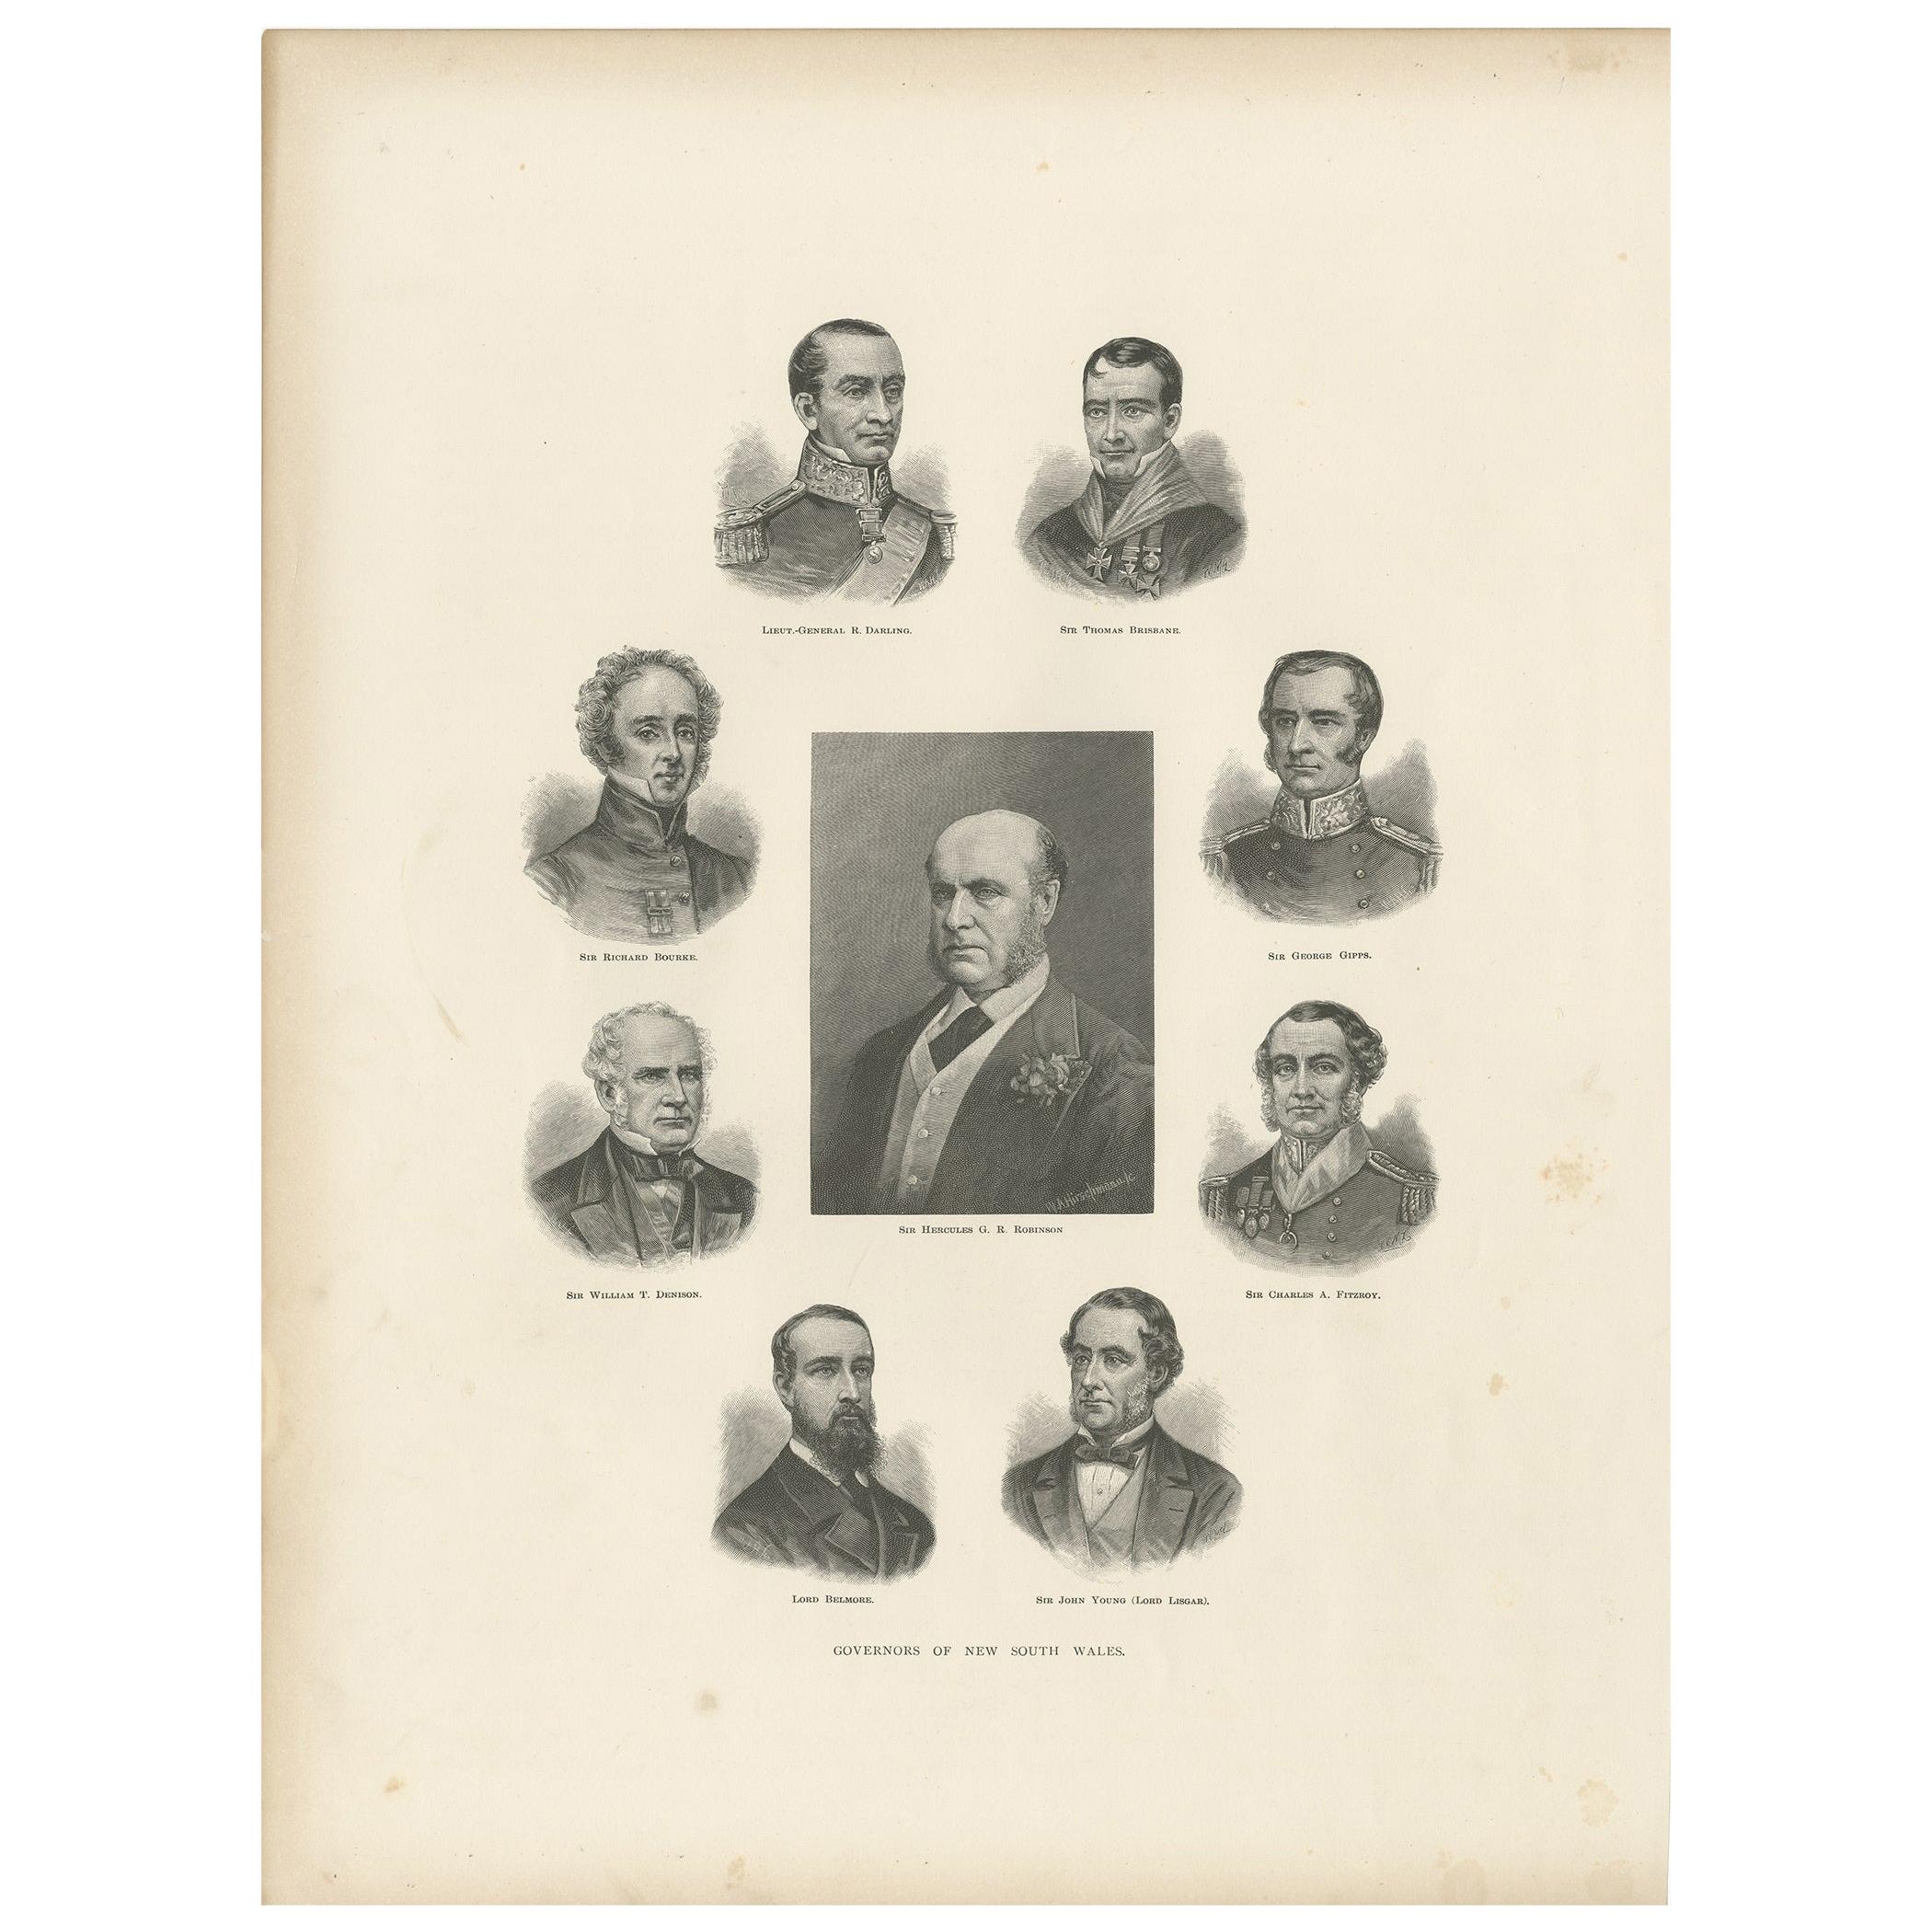 Antique Print of the Governors of New South Wales, 1888